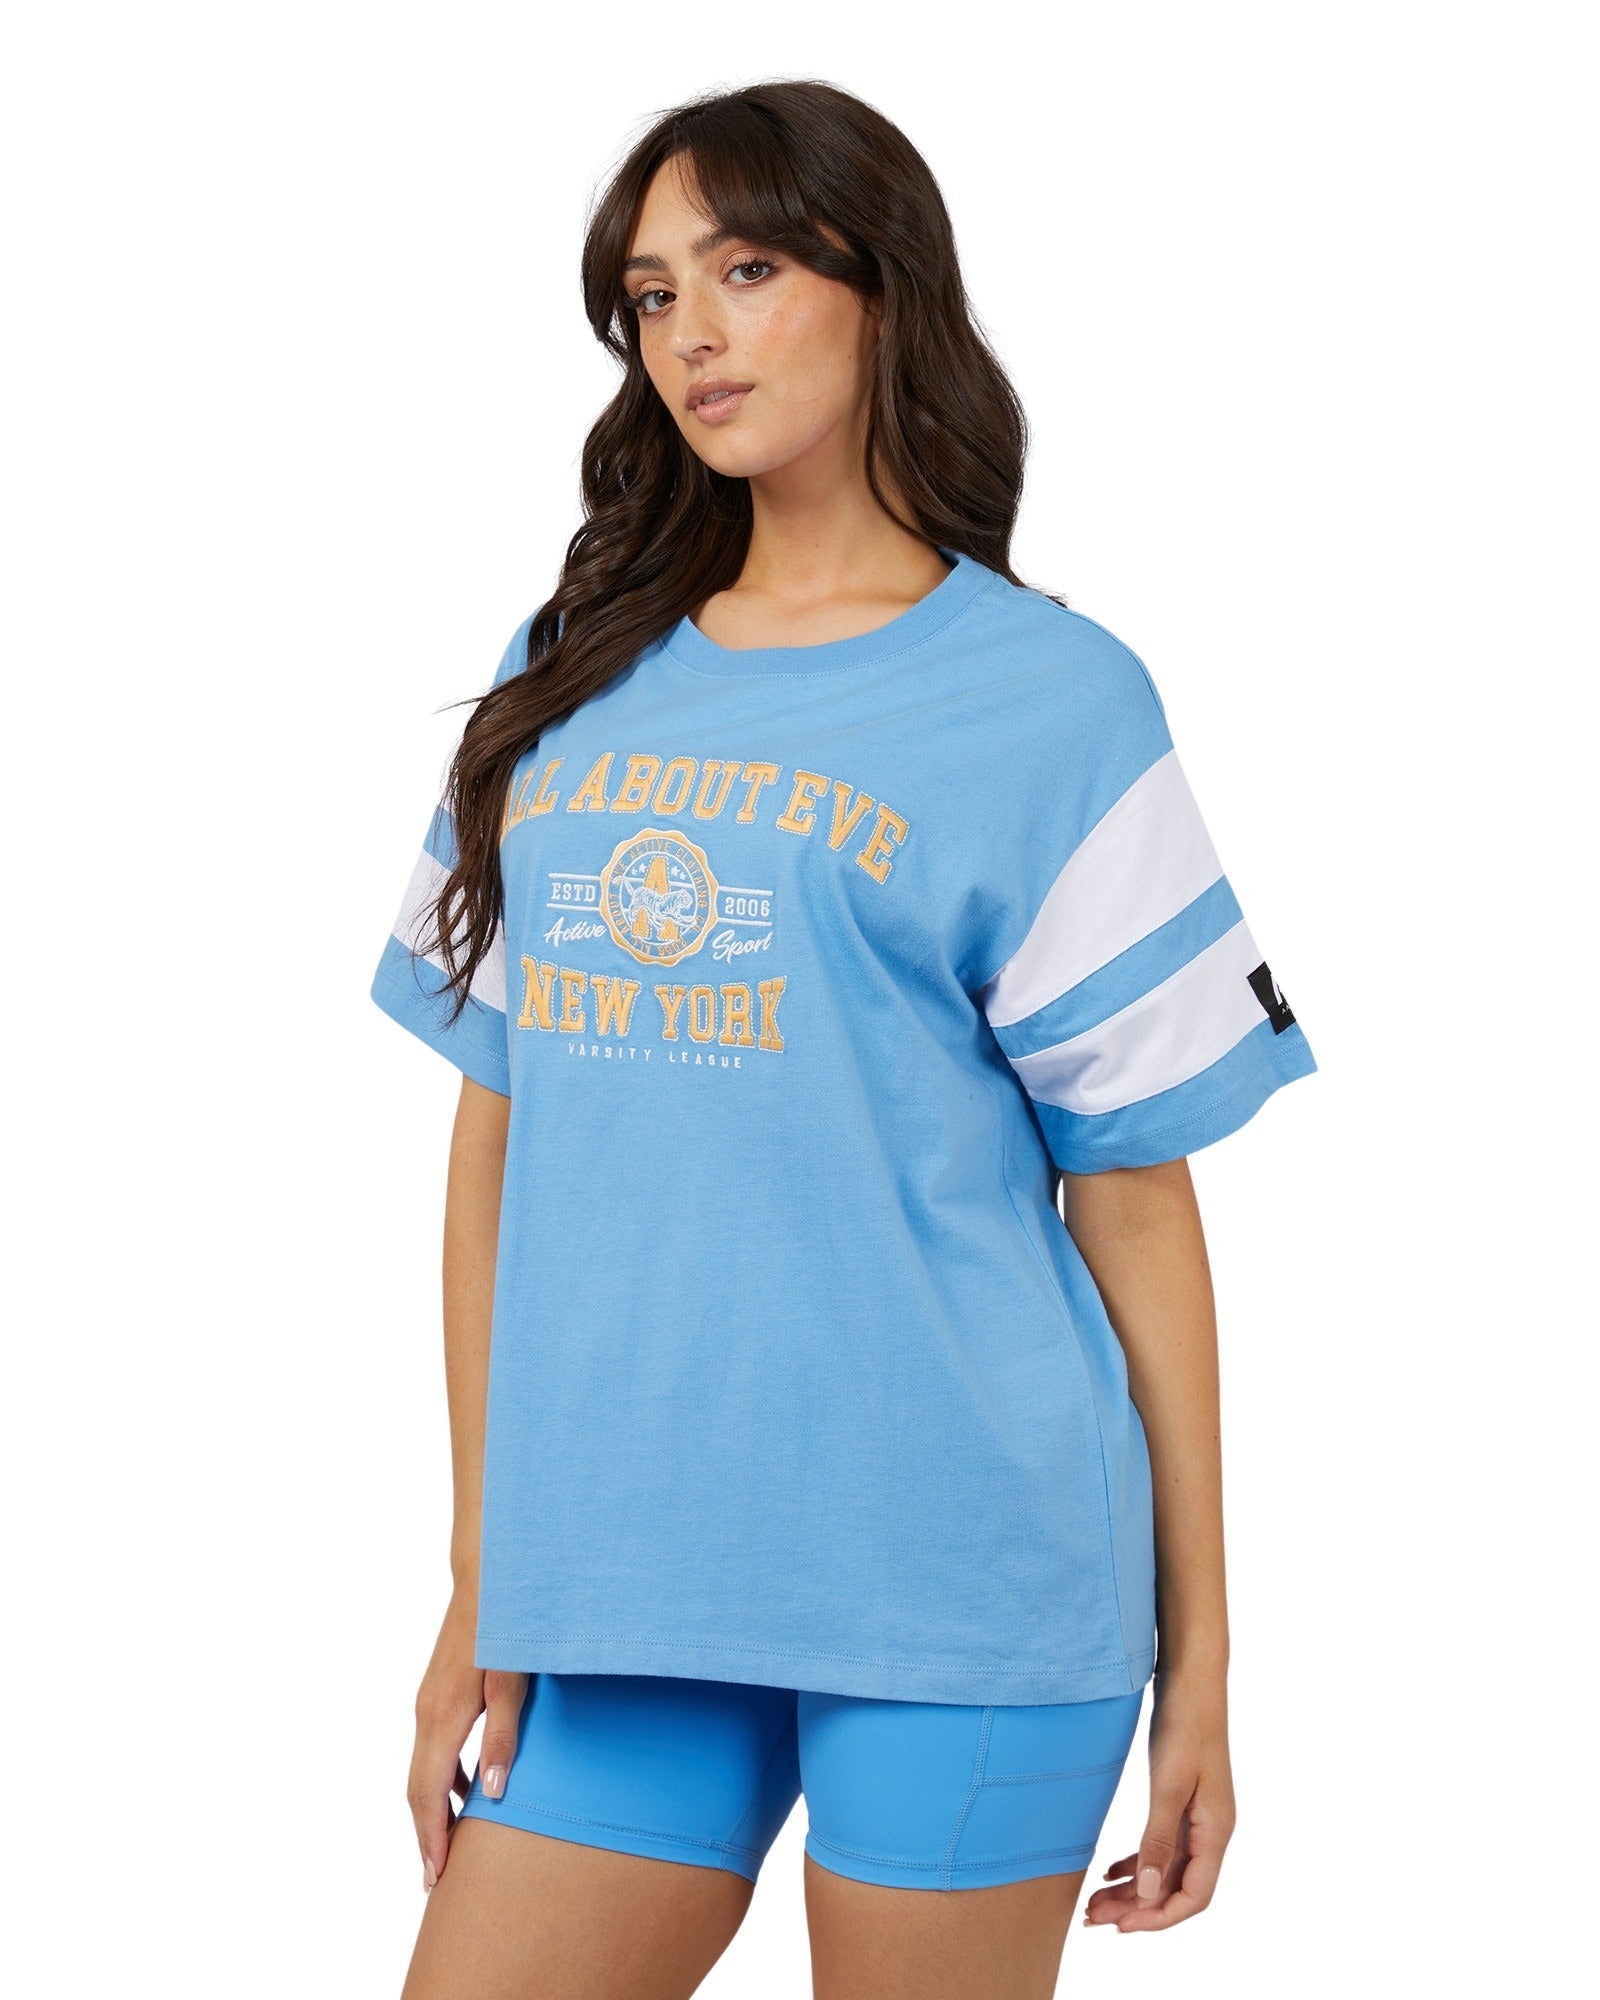 All About Eve - AAE Game Athletics Tee - Blue